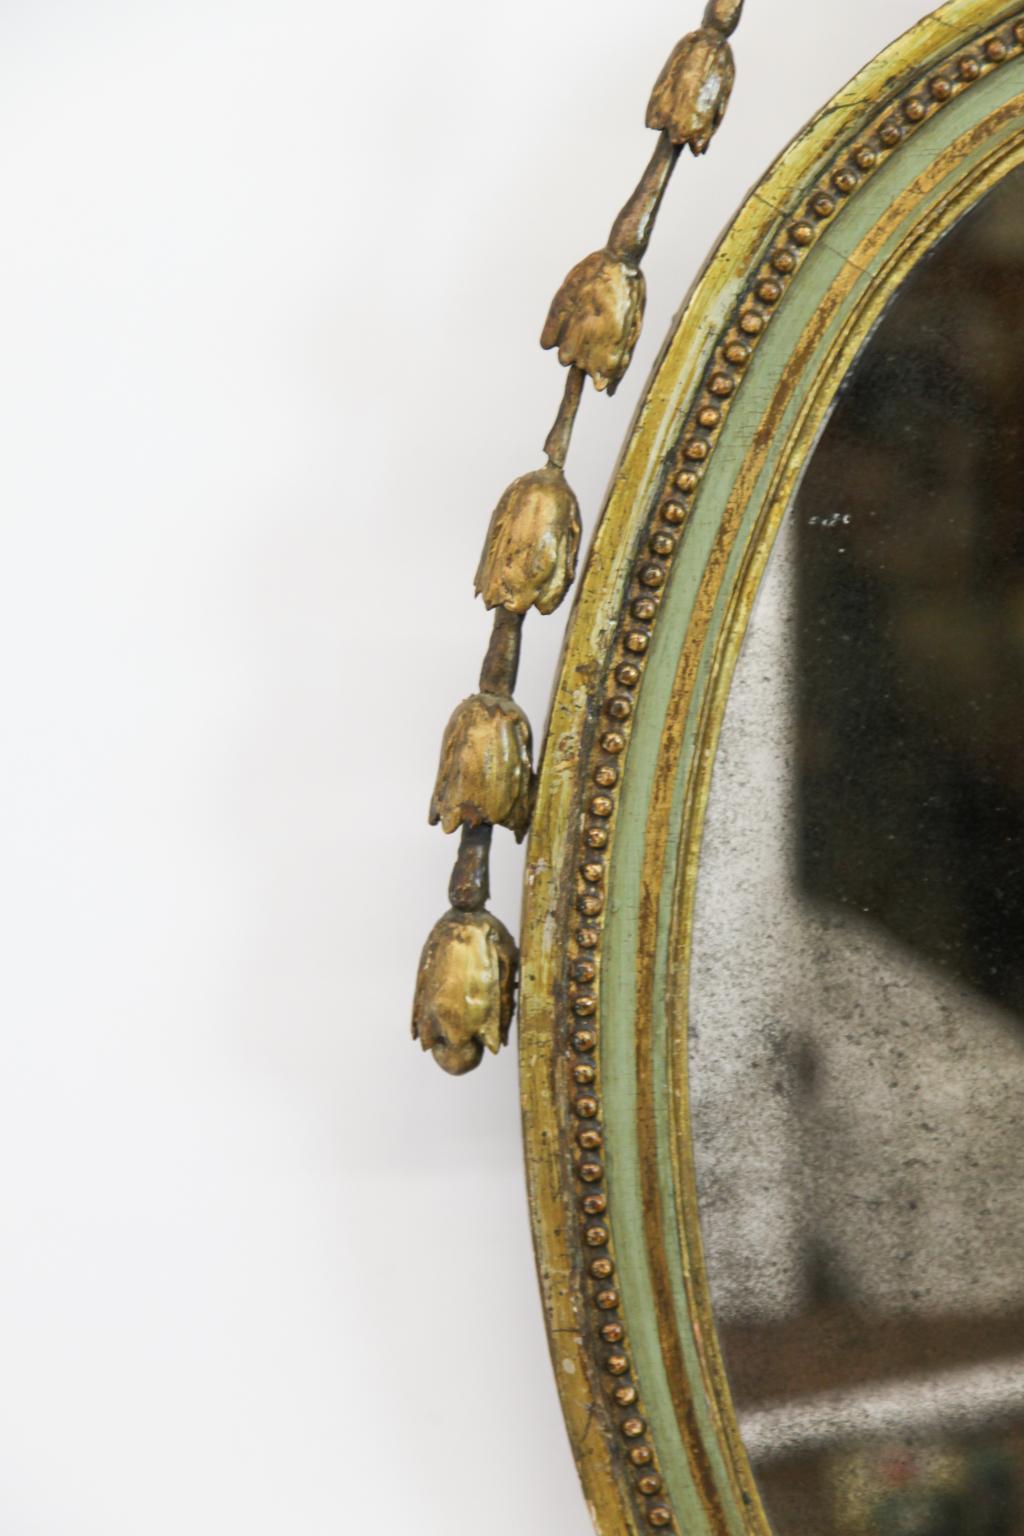 18th century Adam mirror, crowned with gilded urn with arabesque vine scrolls adorned with bellflower and foliate, the oval painted and gilded wood frame with foliated arabesques and bellflower motif below.